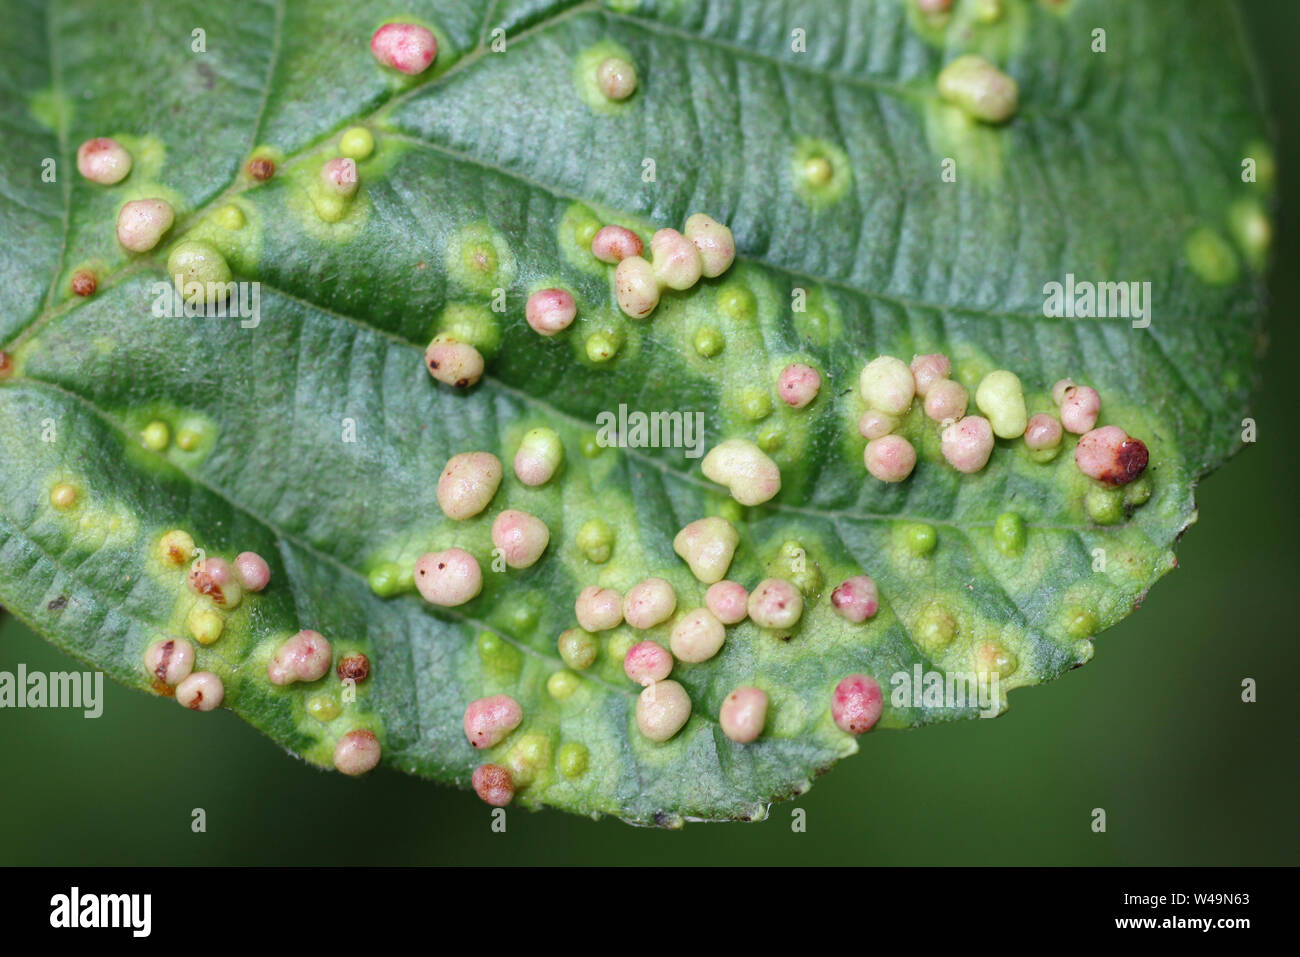 Galls on Alder Alnus glutinosa leaves caused by the Alder Gall Mite Eriophyes laevis Stock Photo